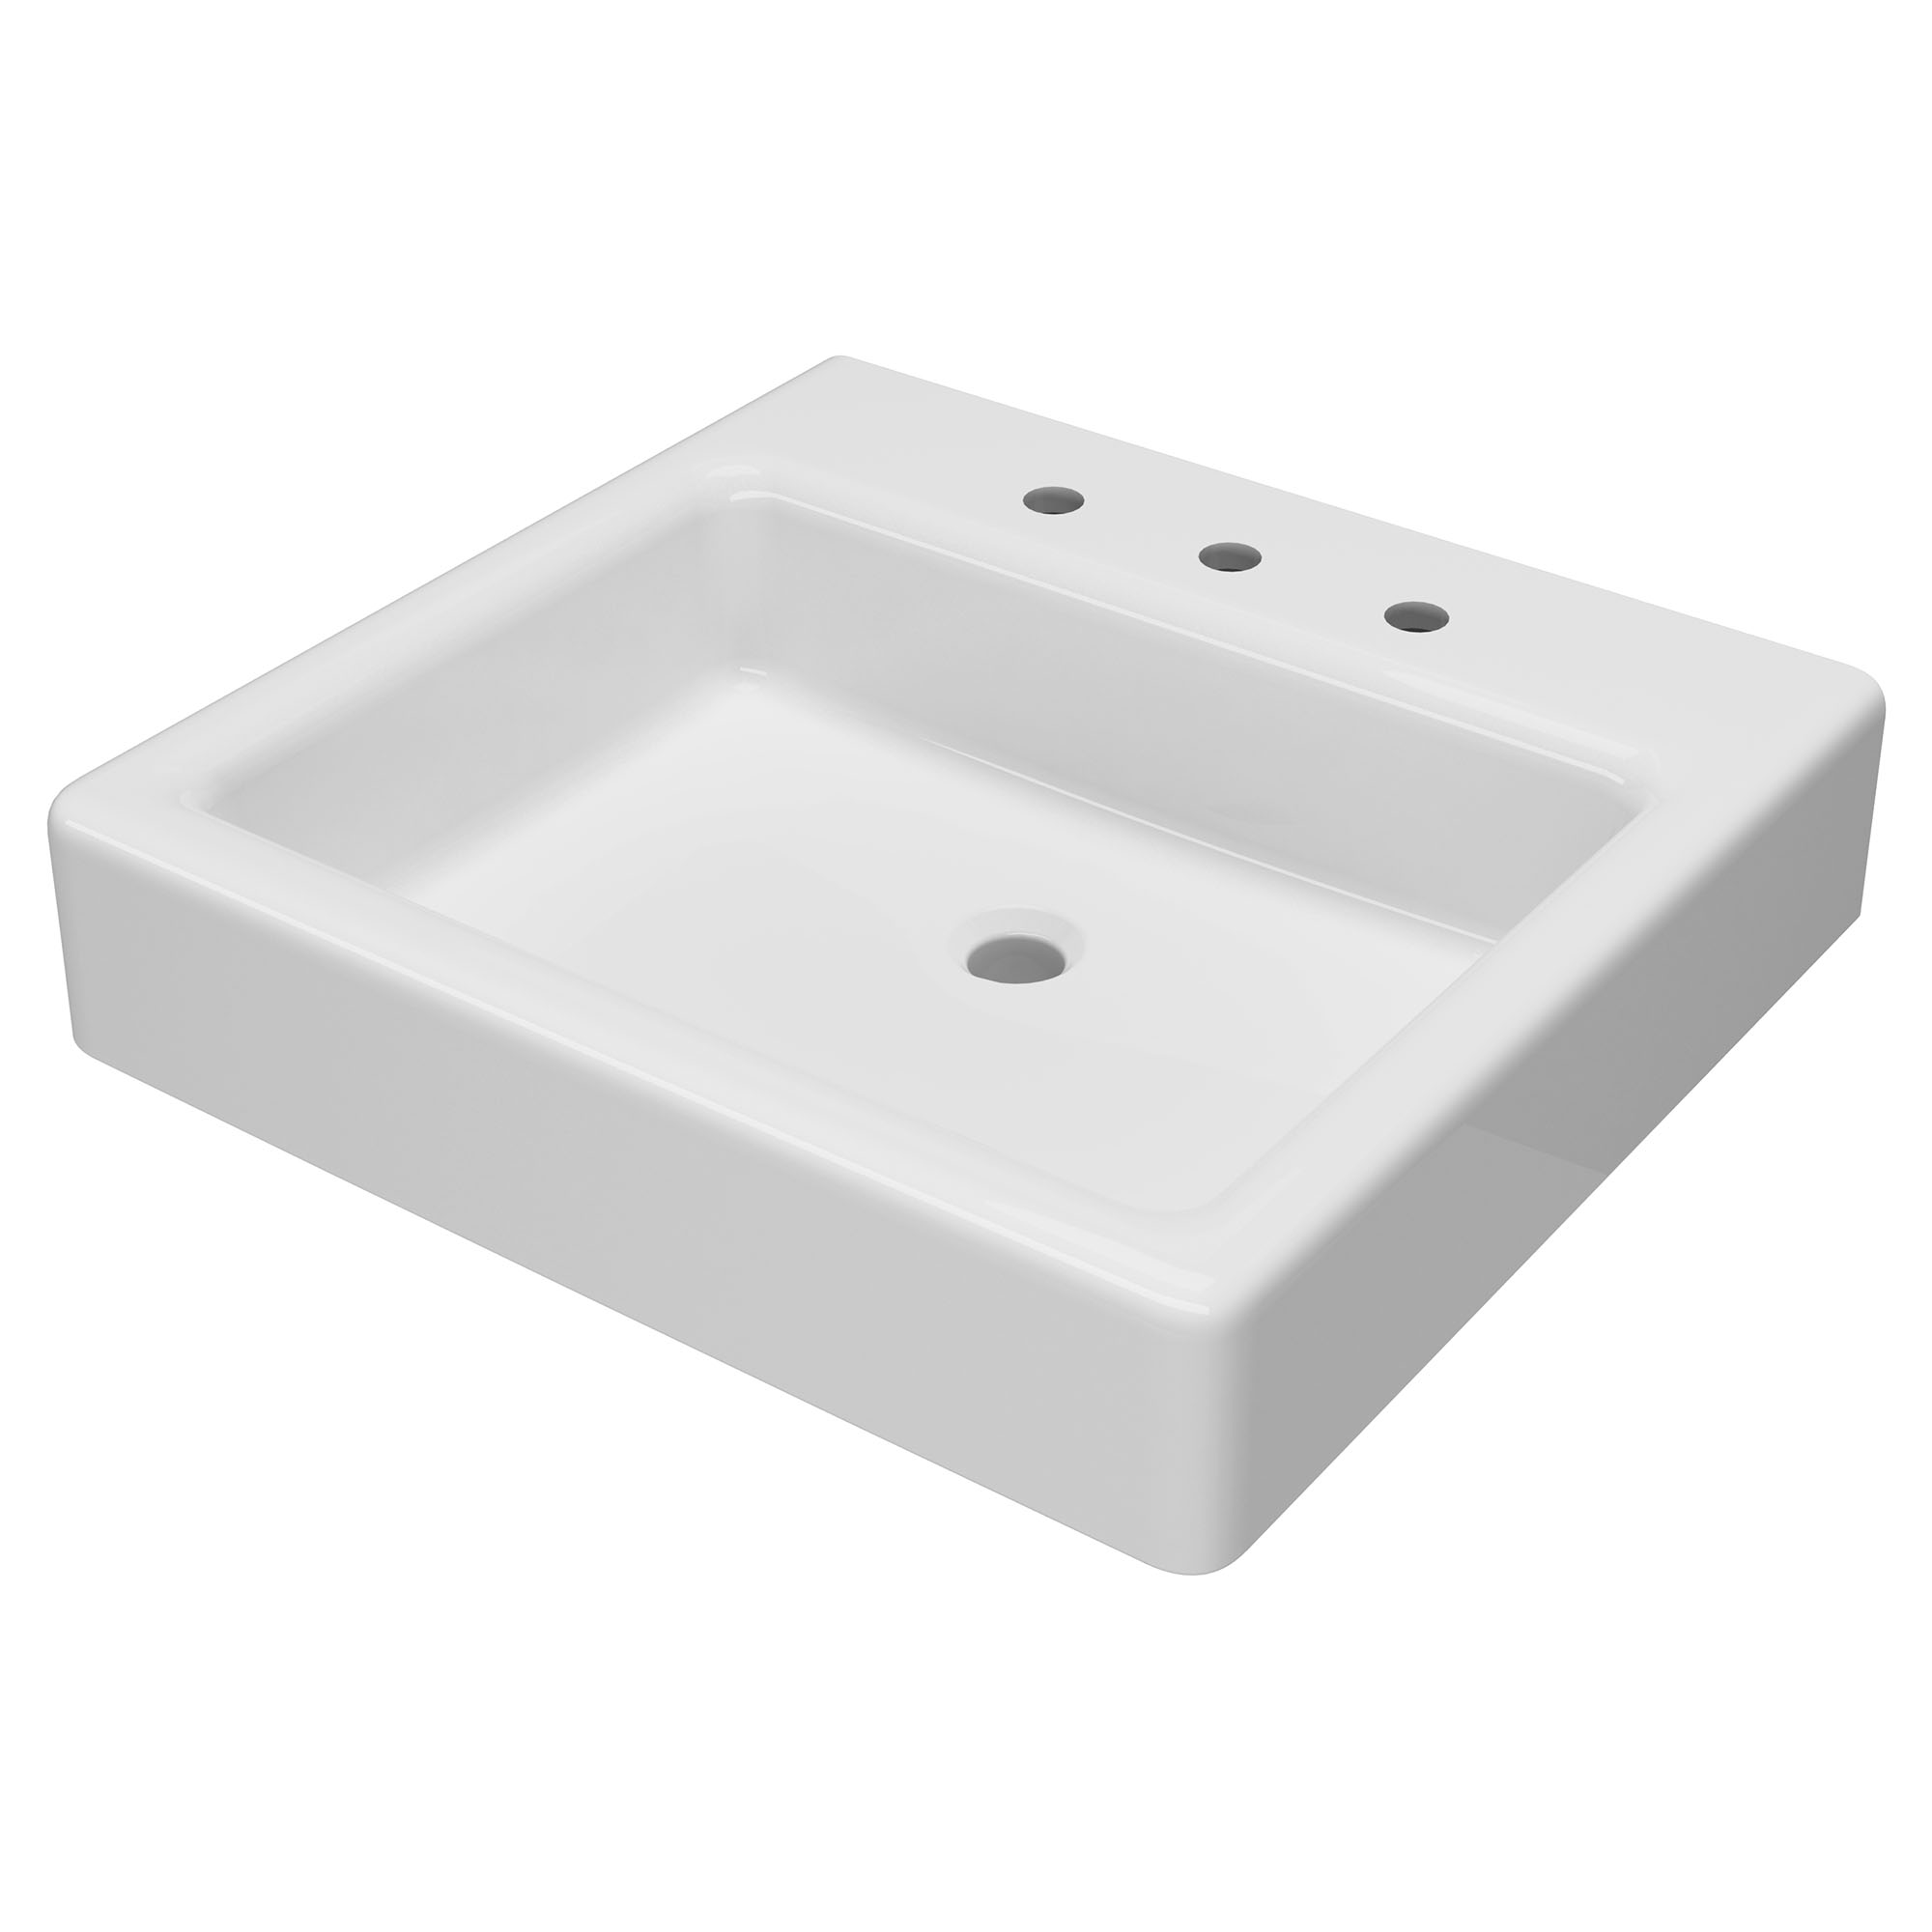 24 in.  Above Counter Bathroom Sink, 3 hole